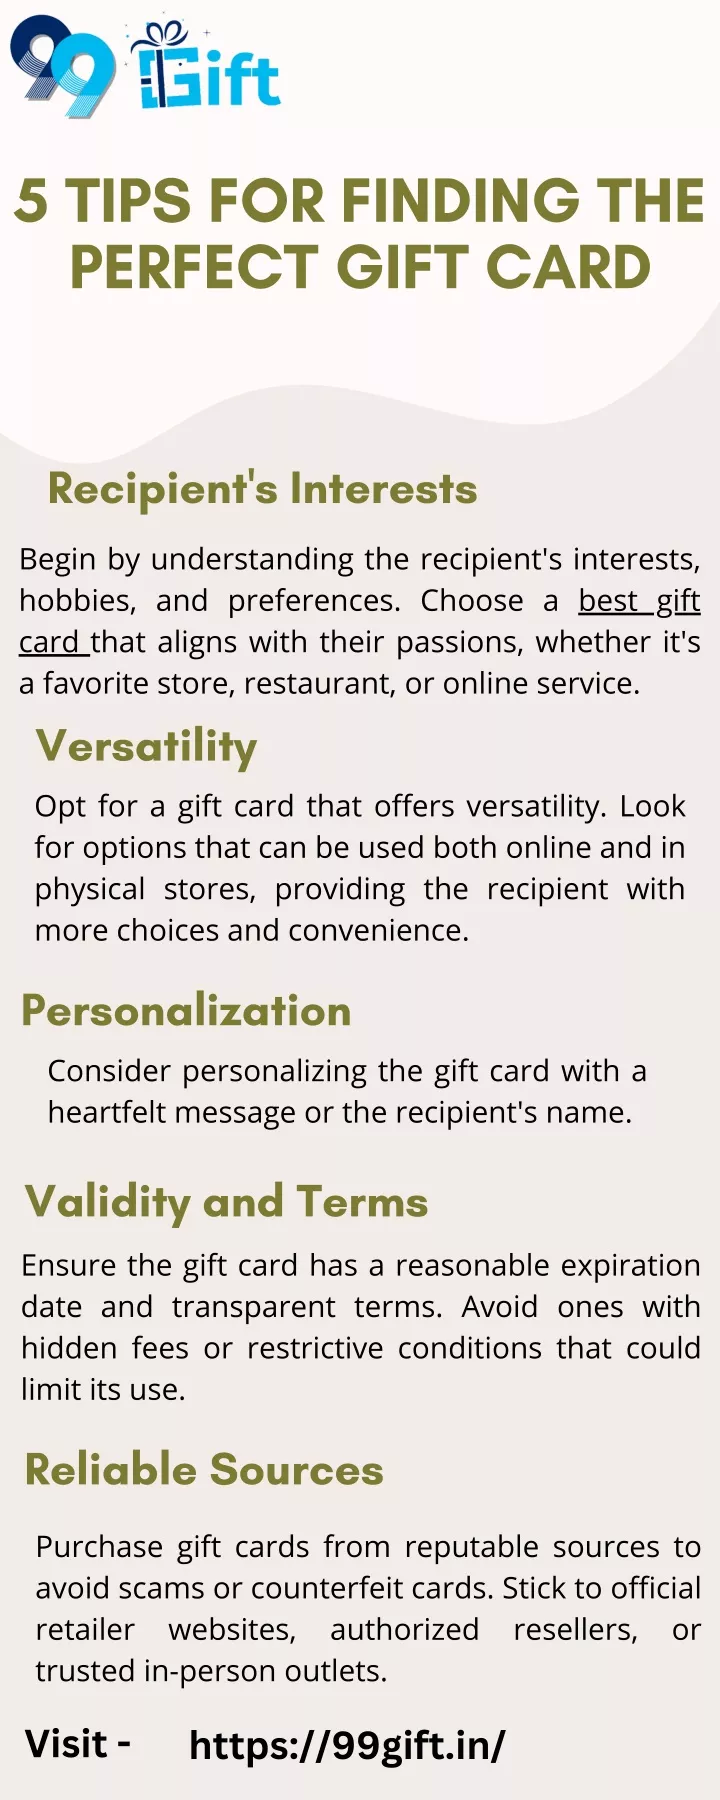 5 tips for finding the perfect gift card